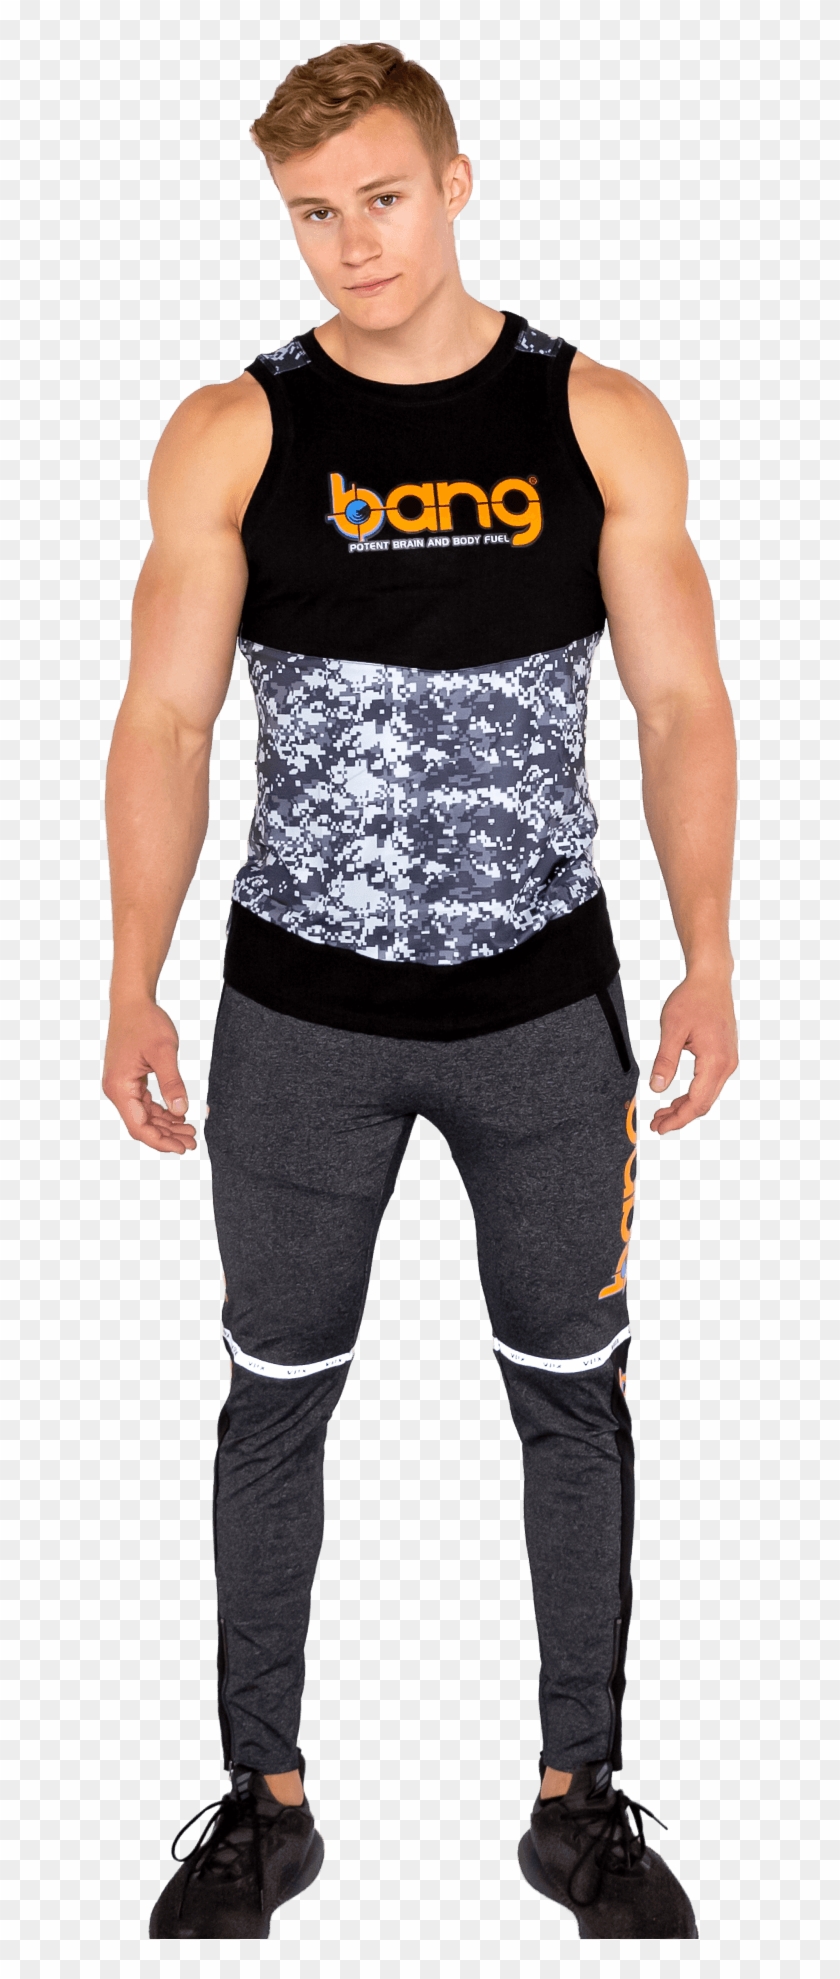 Bang Camo Fighter Muscle Tanks And Reflective Tapered - Fitness Professional Clipart #1403396